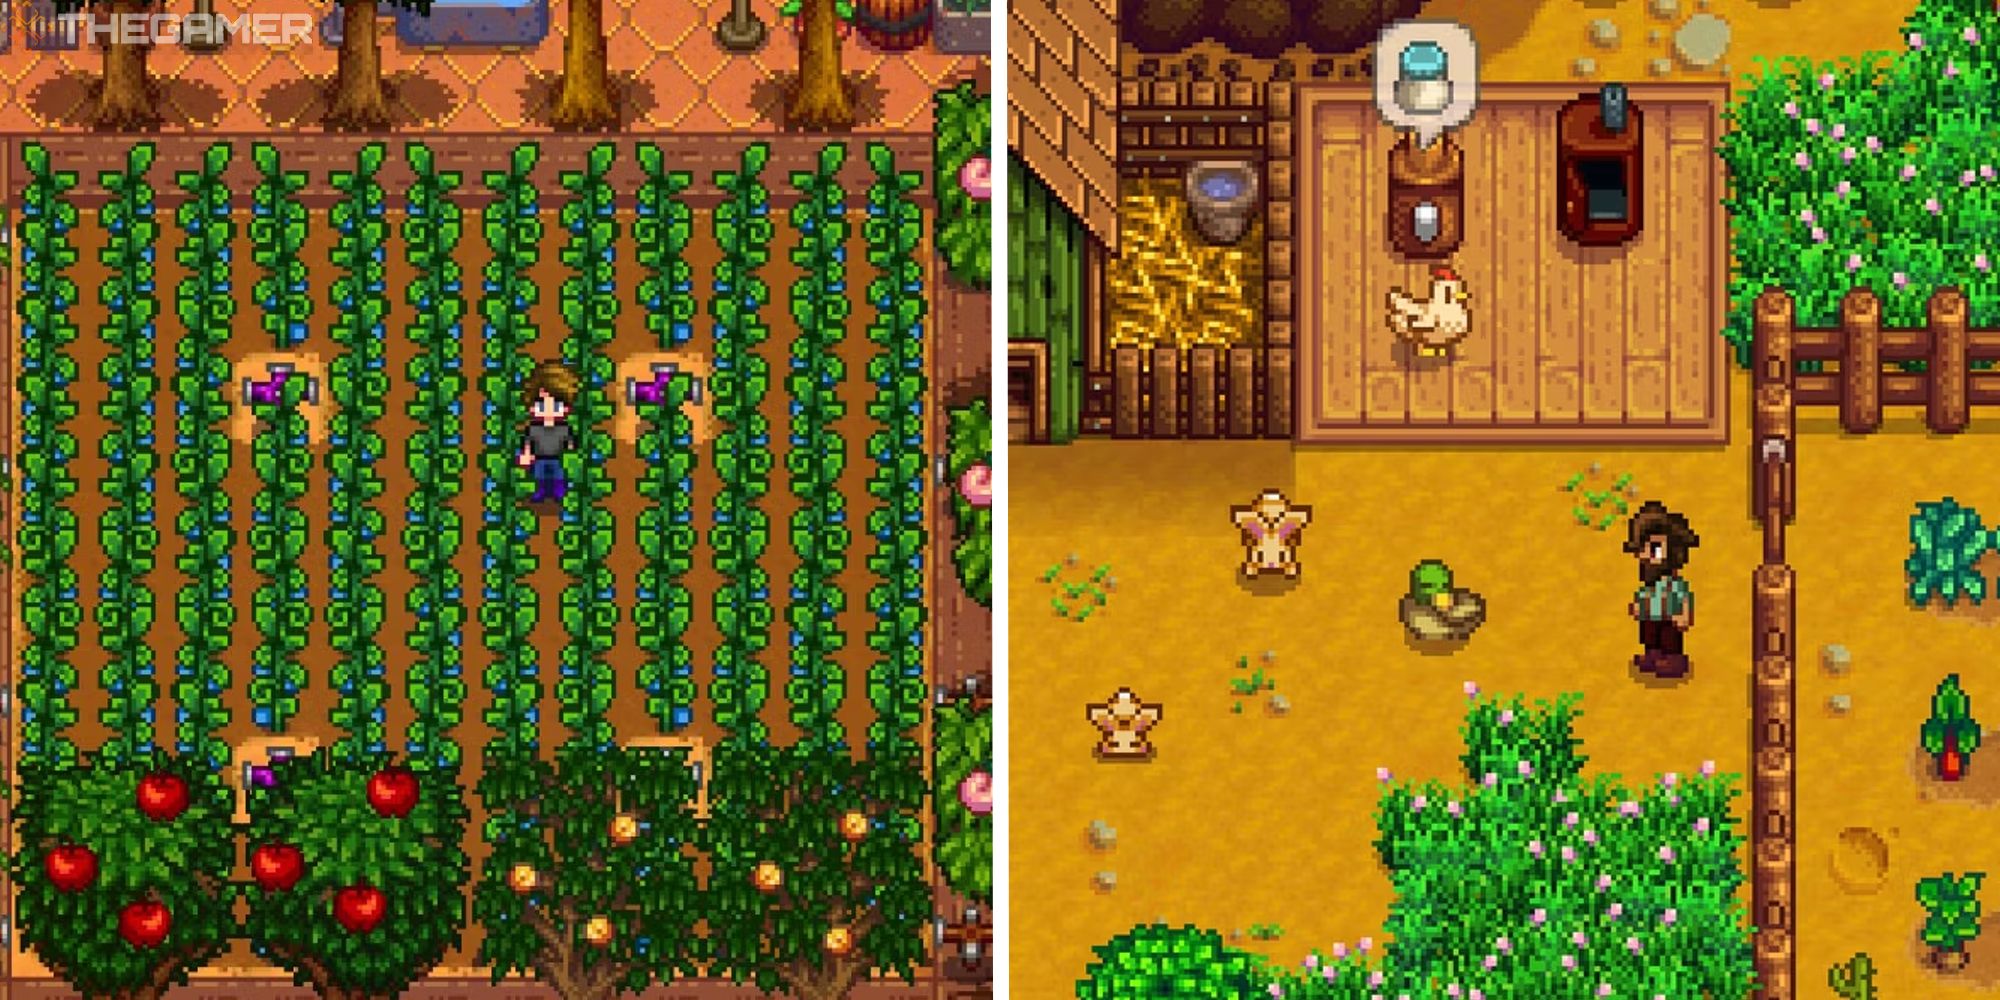 stardew valley split image showing player in greenhouse next to image of player outside coop with duck nearby